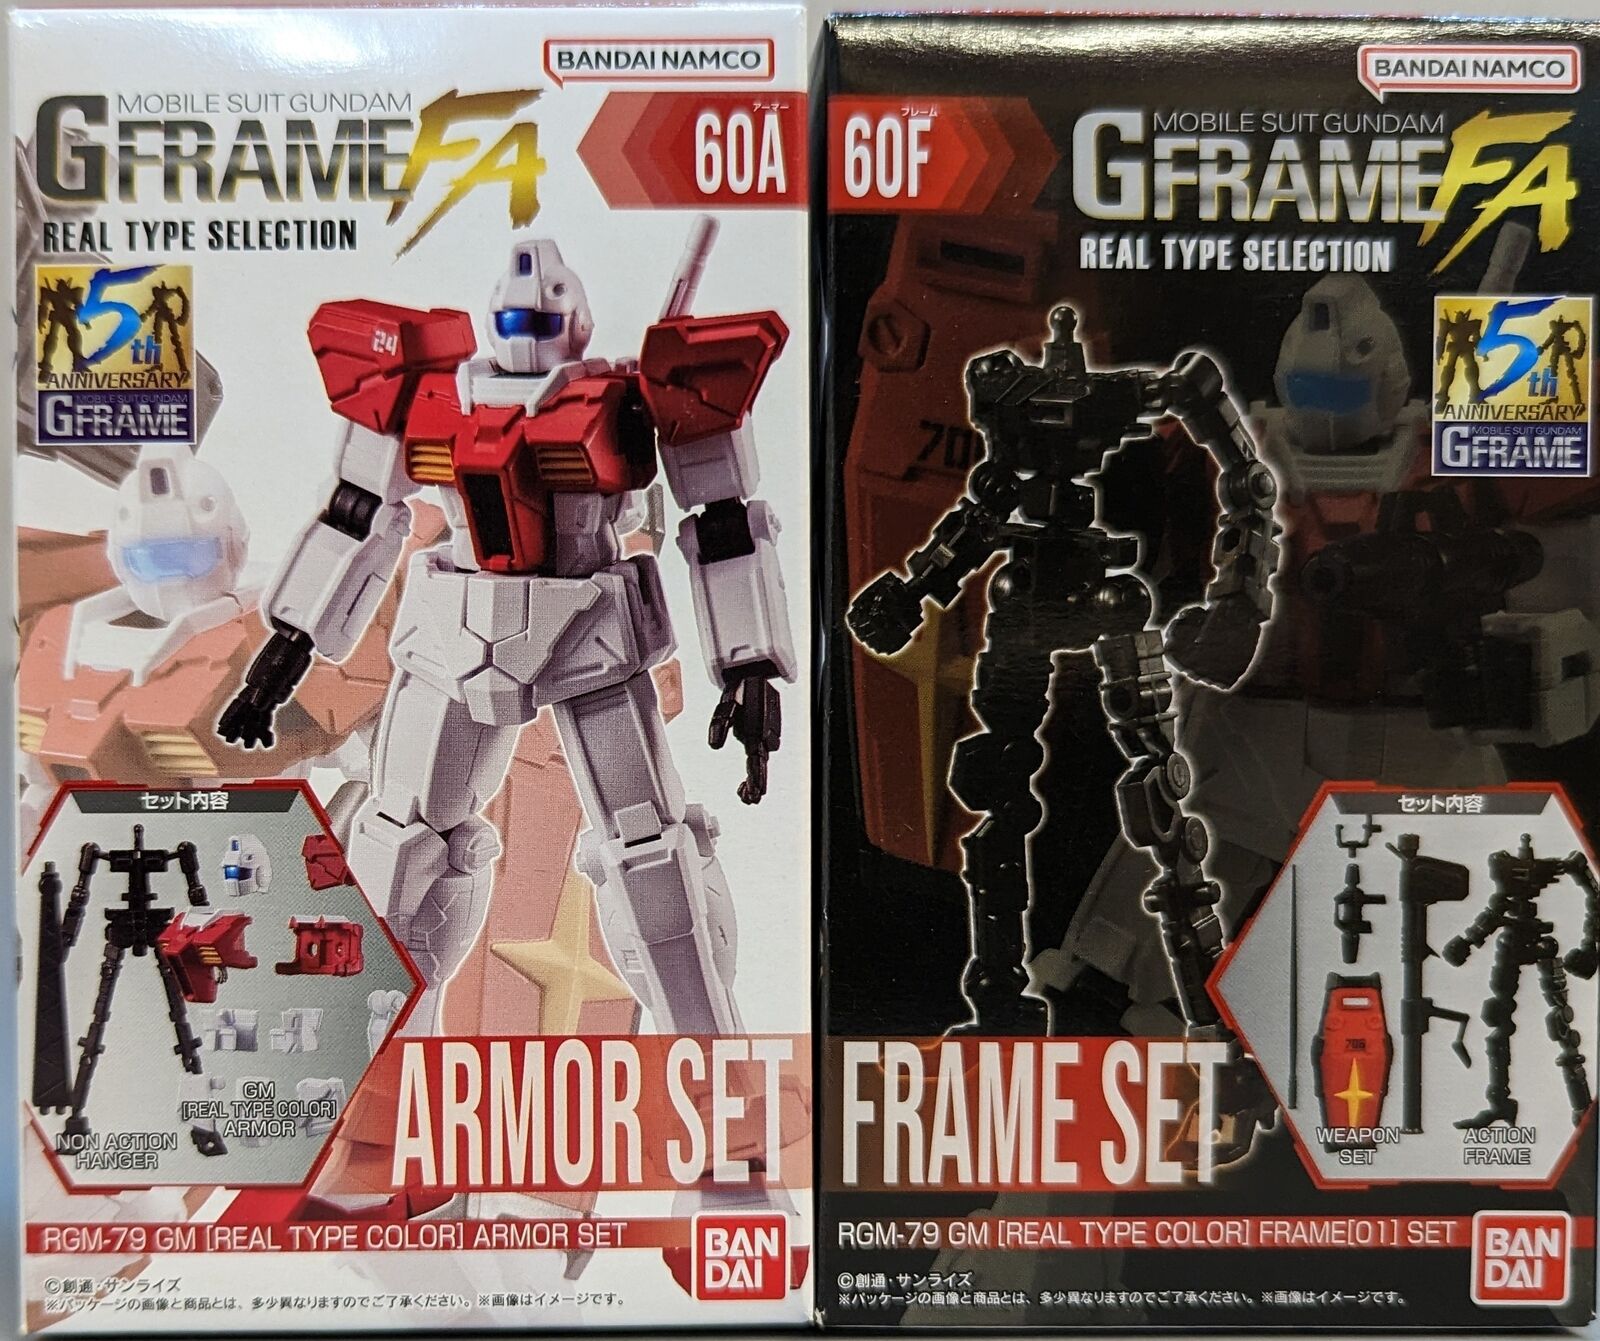 Bandai G Frame FA REAL TYPE SELECTION Gym [Real Type Color] (Armor set + Fra...